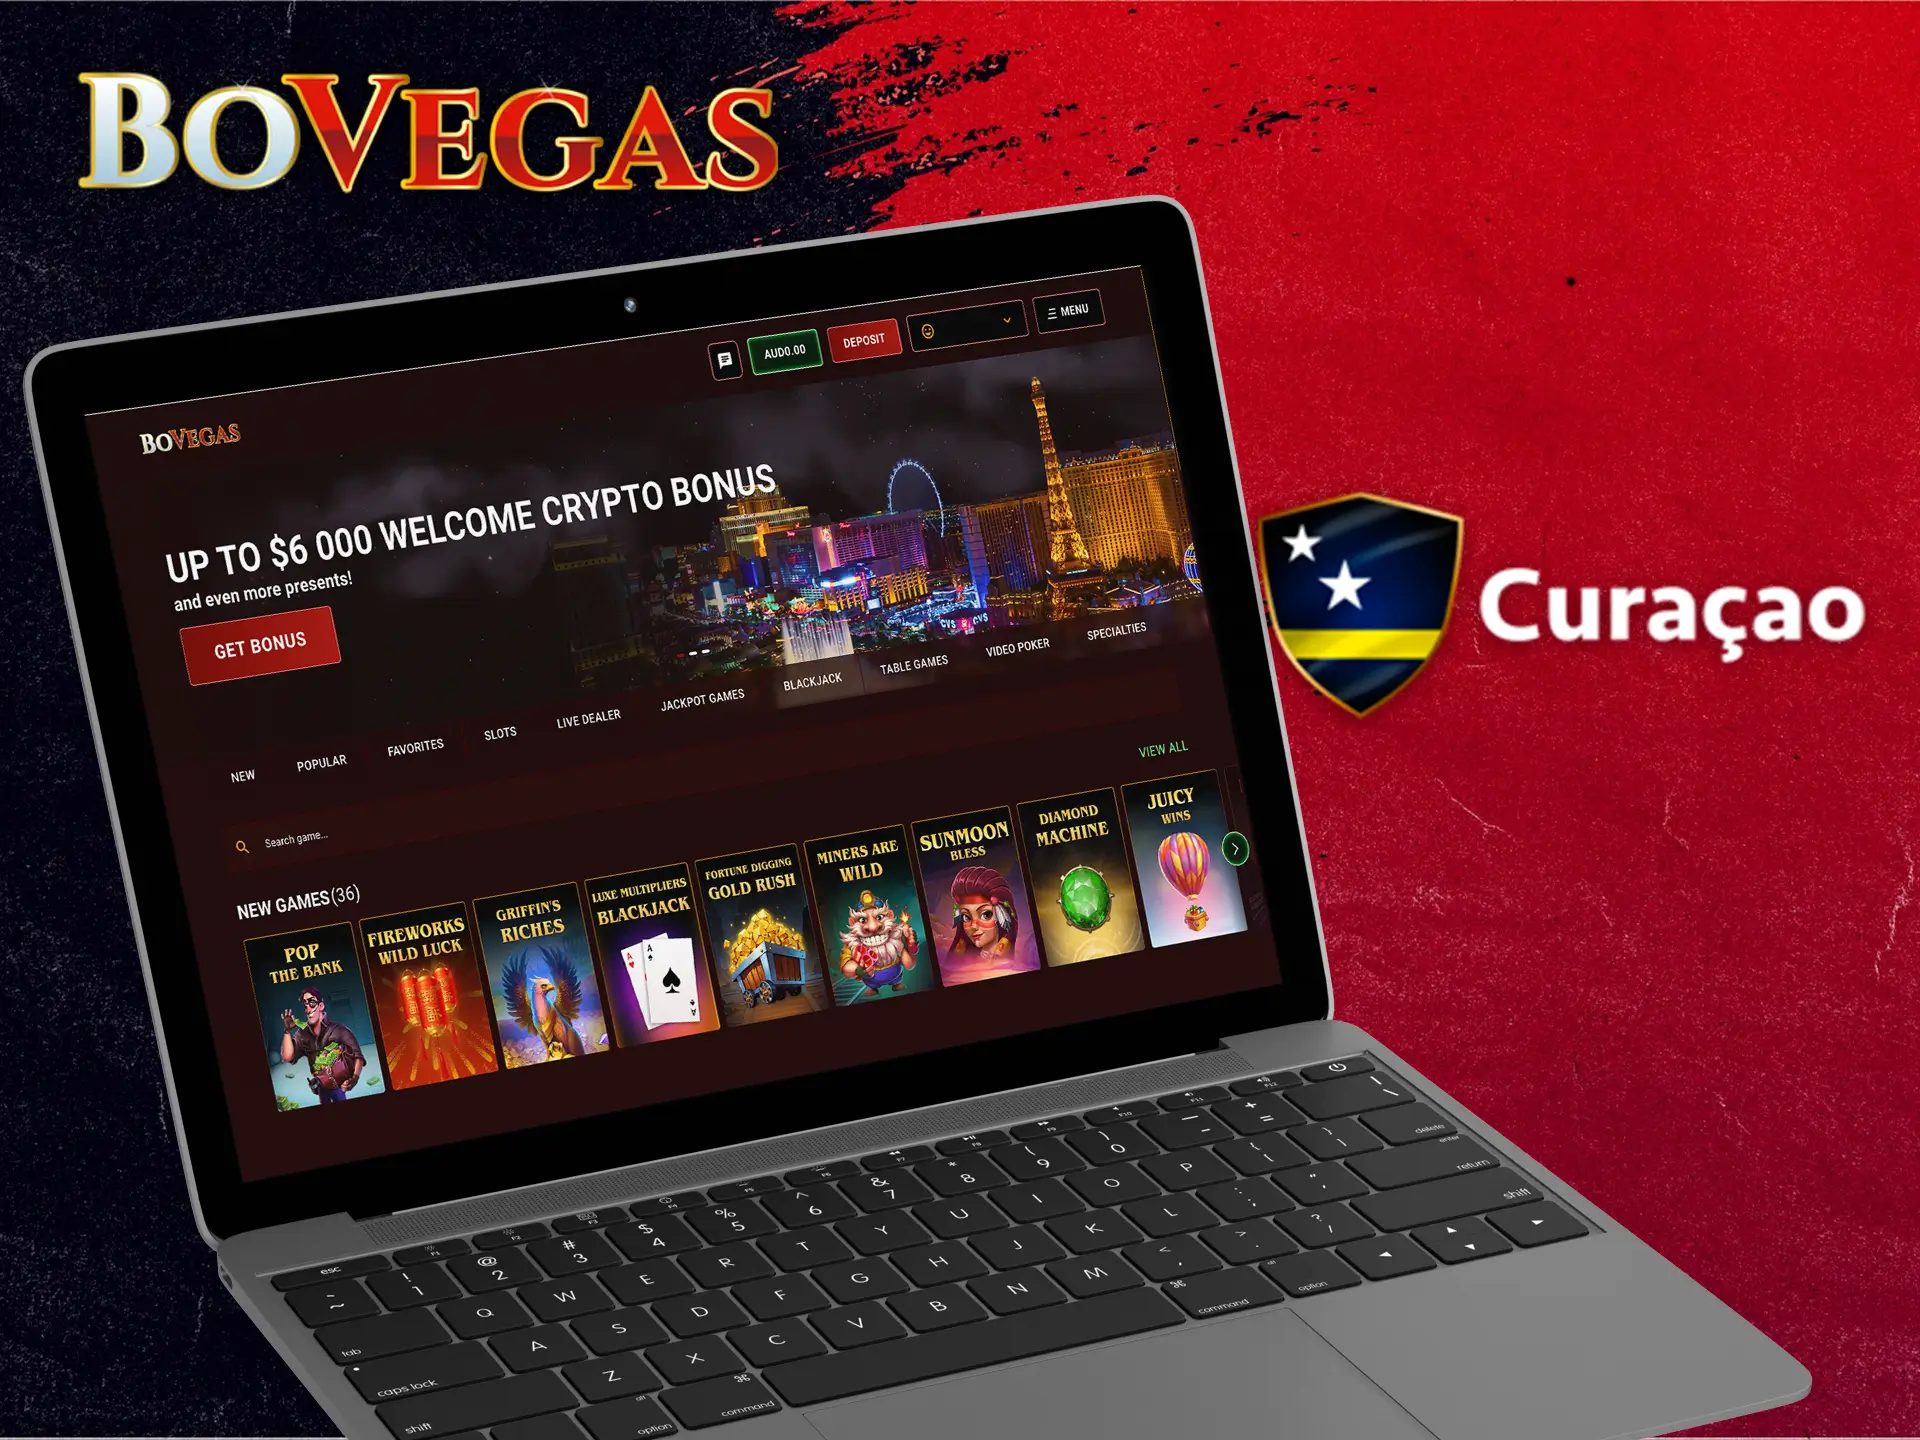 BoVegas is a completely legitimate casino in Australia and holds a Curacao License.